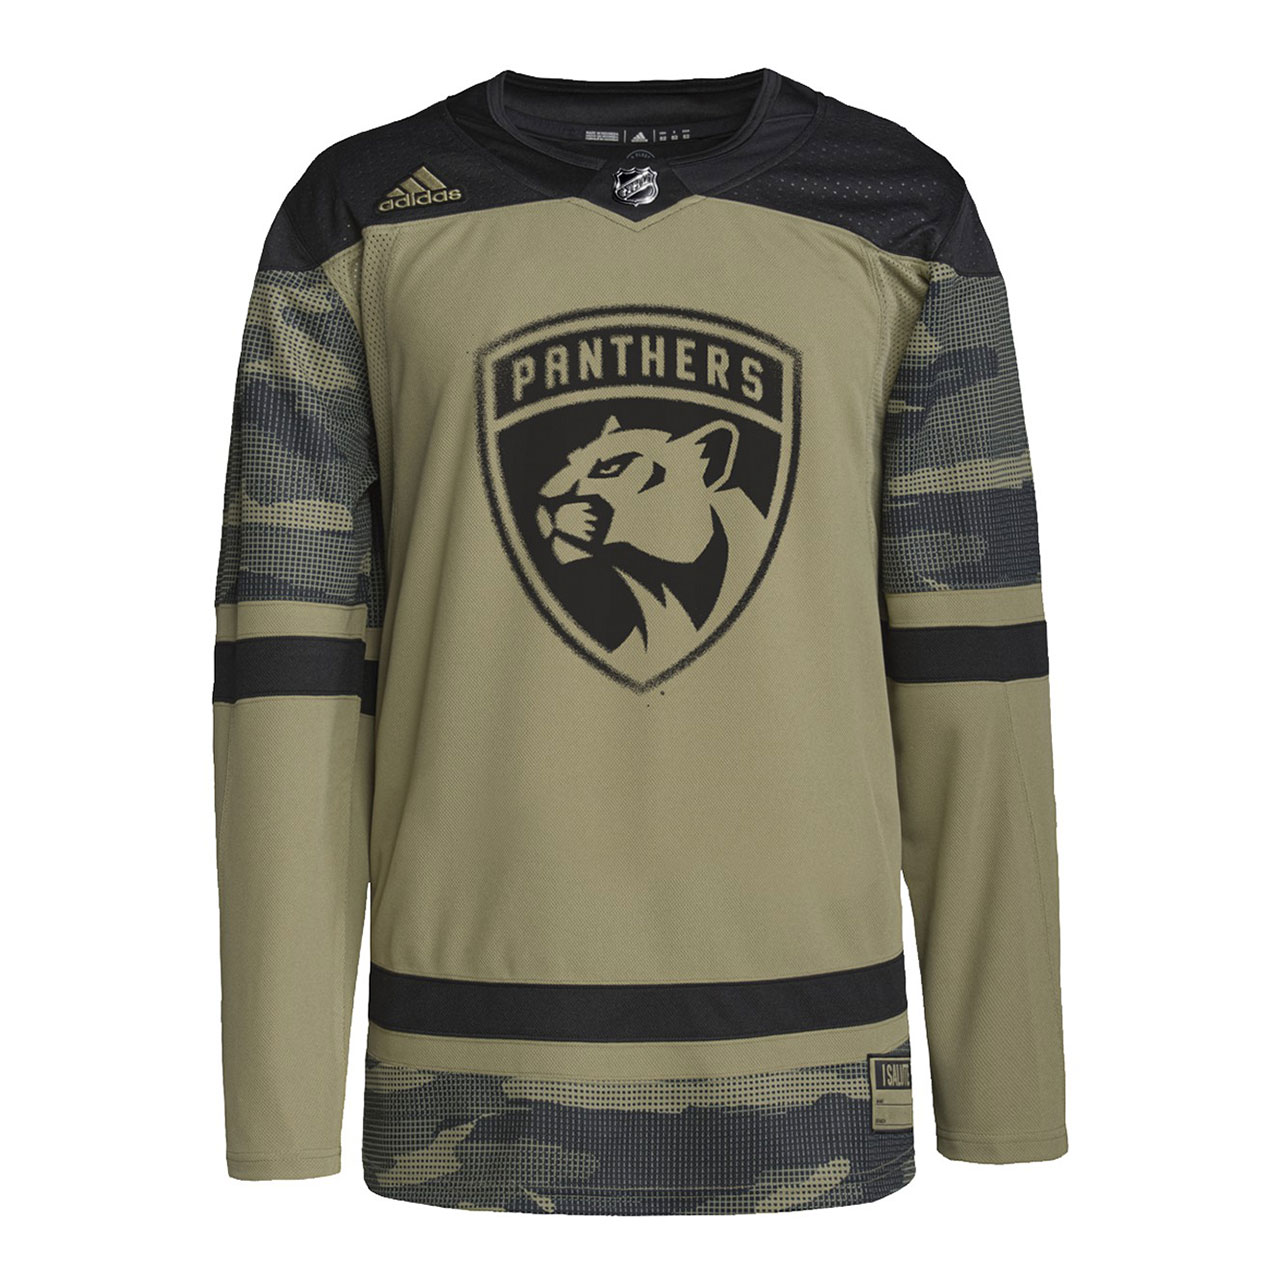 Spencer Knight Florida Panthers Adidas Primegreen Authentic NHL Hockey Jersey - Home / M/50